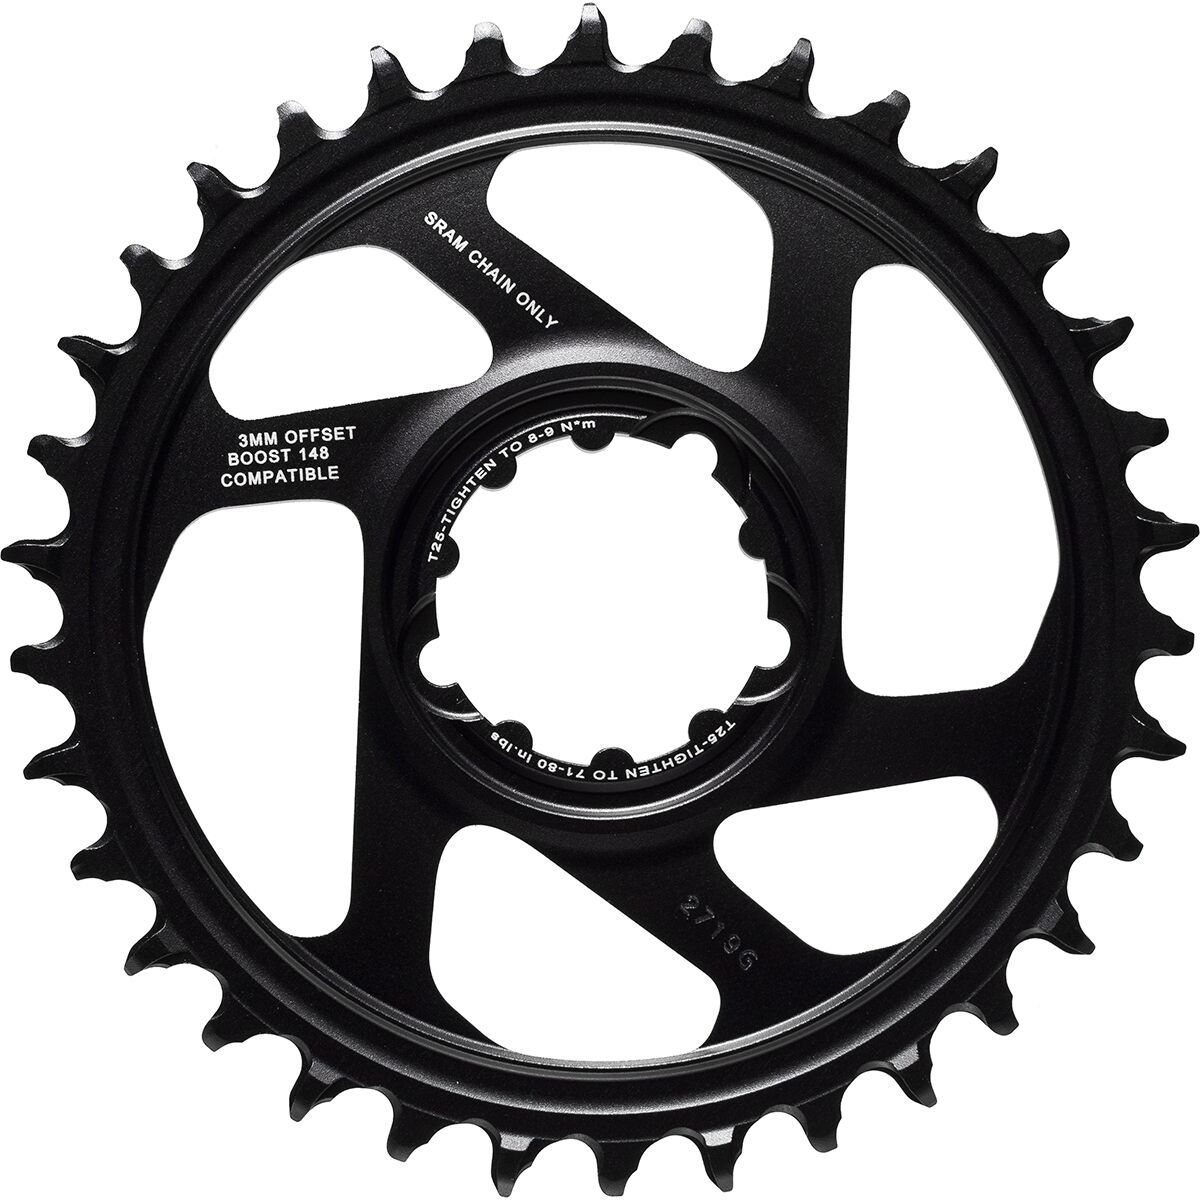 SRAM X-Sync 2 Eagle 12-Speed Direct Mount Chainring - Boost